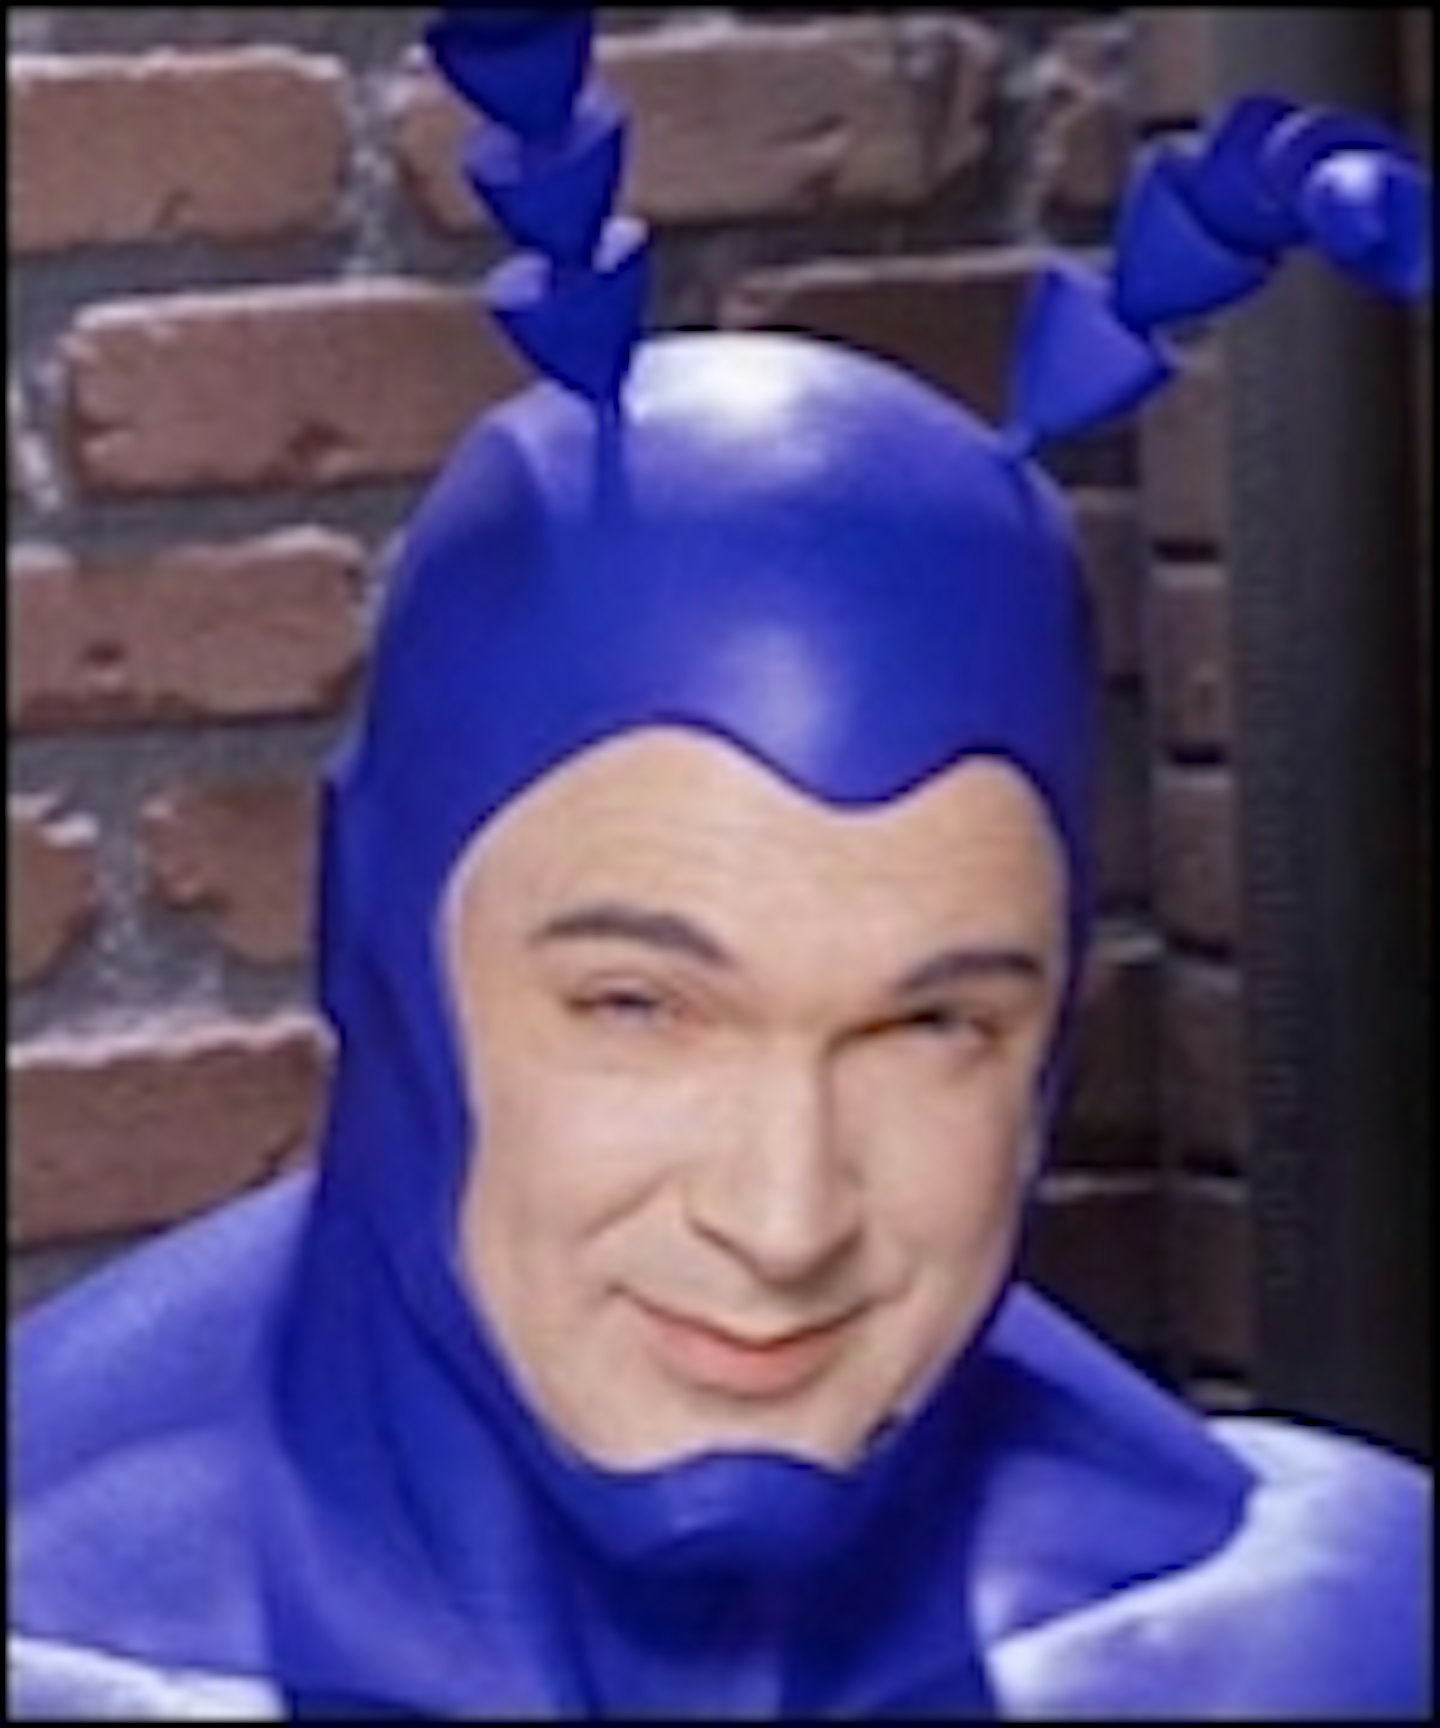 The Tick TV Series Could Return